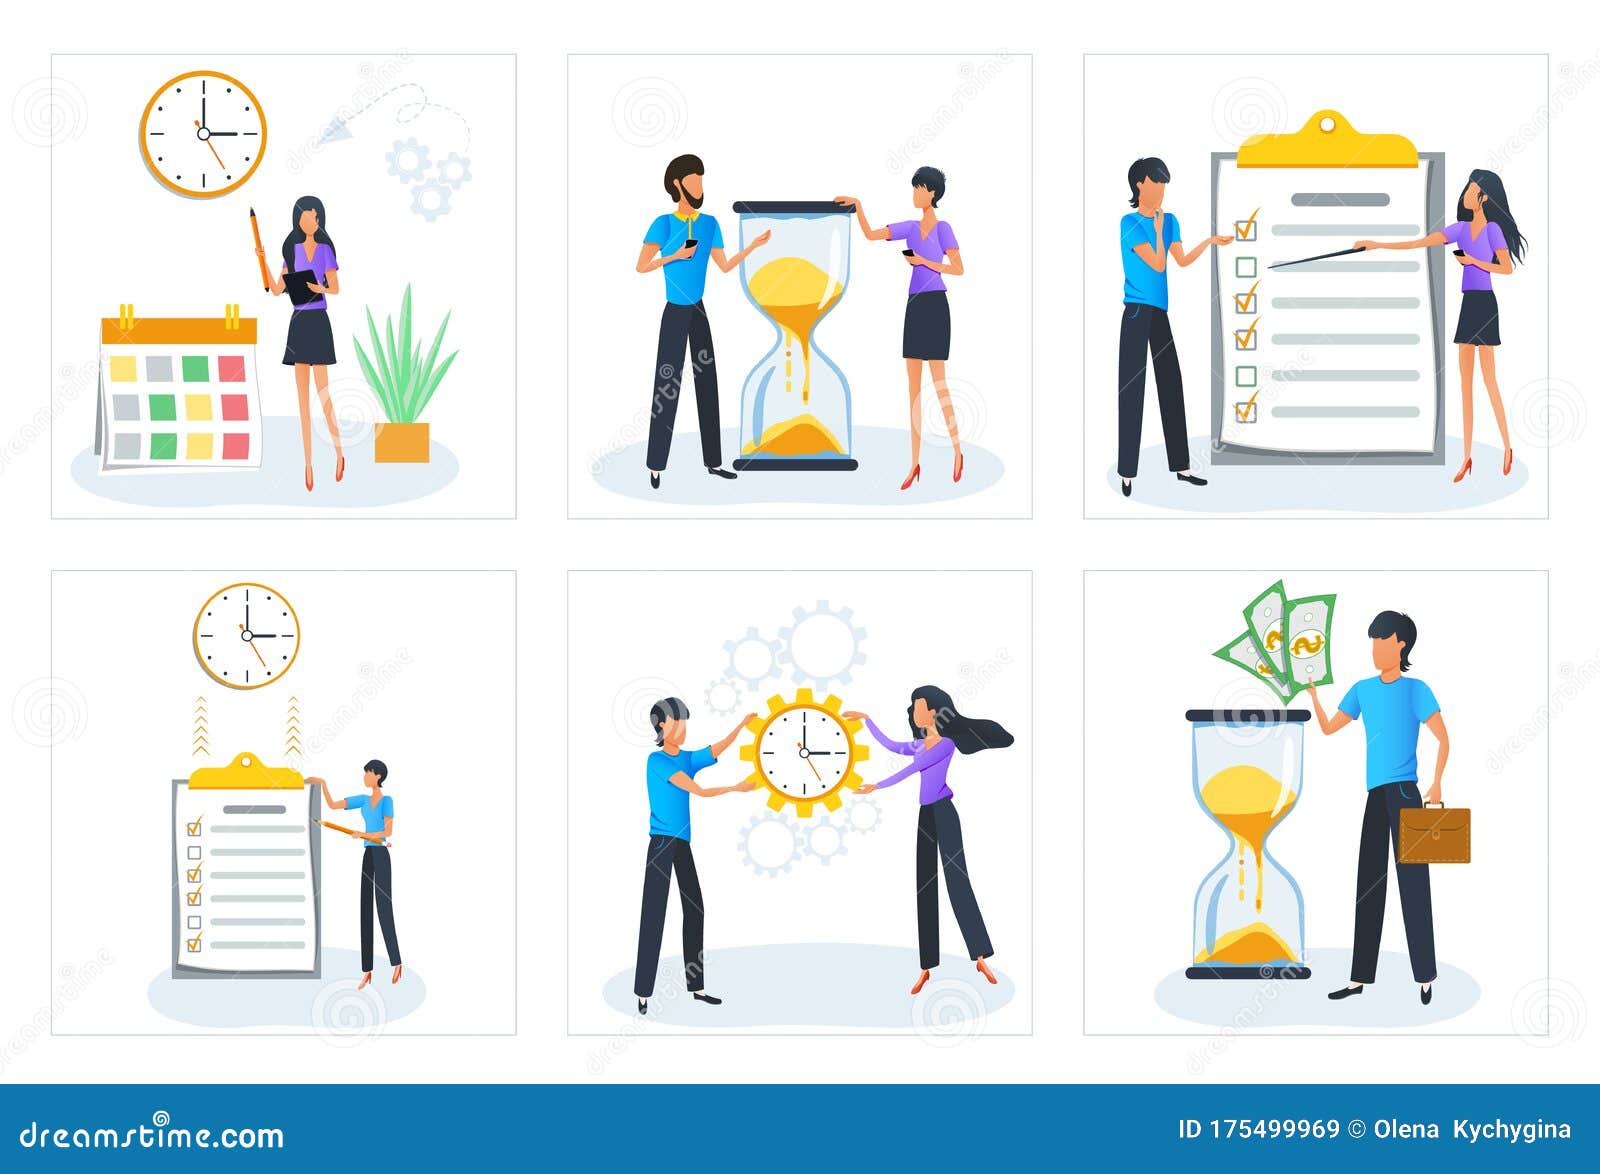 Effective Time Management. Business People Organizing Their Tasks, Working Time, Activities, Prioritize Goals Using To List Stock Vector - Illustration of icon, clock: 175499969